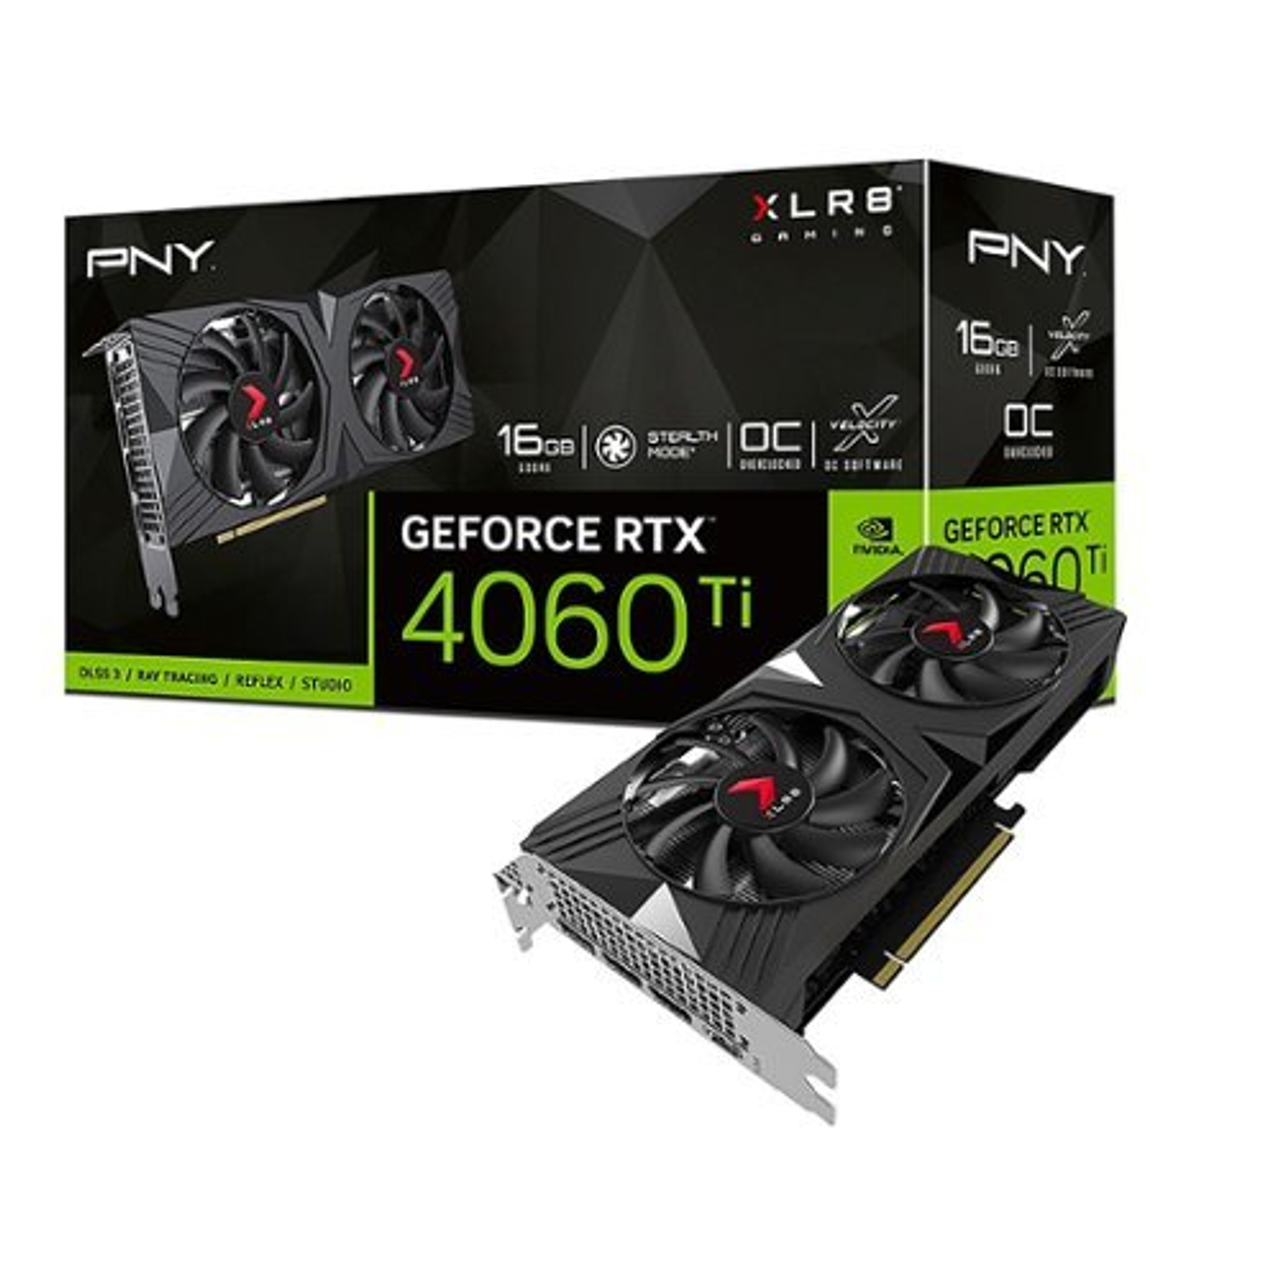 PNY - GeForce RTX 4060 Ti 16GB XLR8 Gaming VERTO Overclocked Graphics Card with Dual Fan - Black